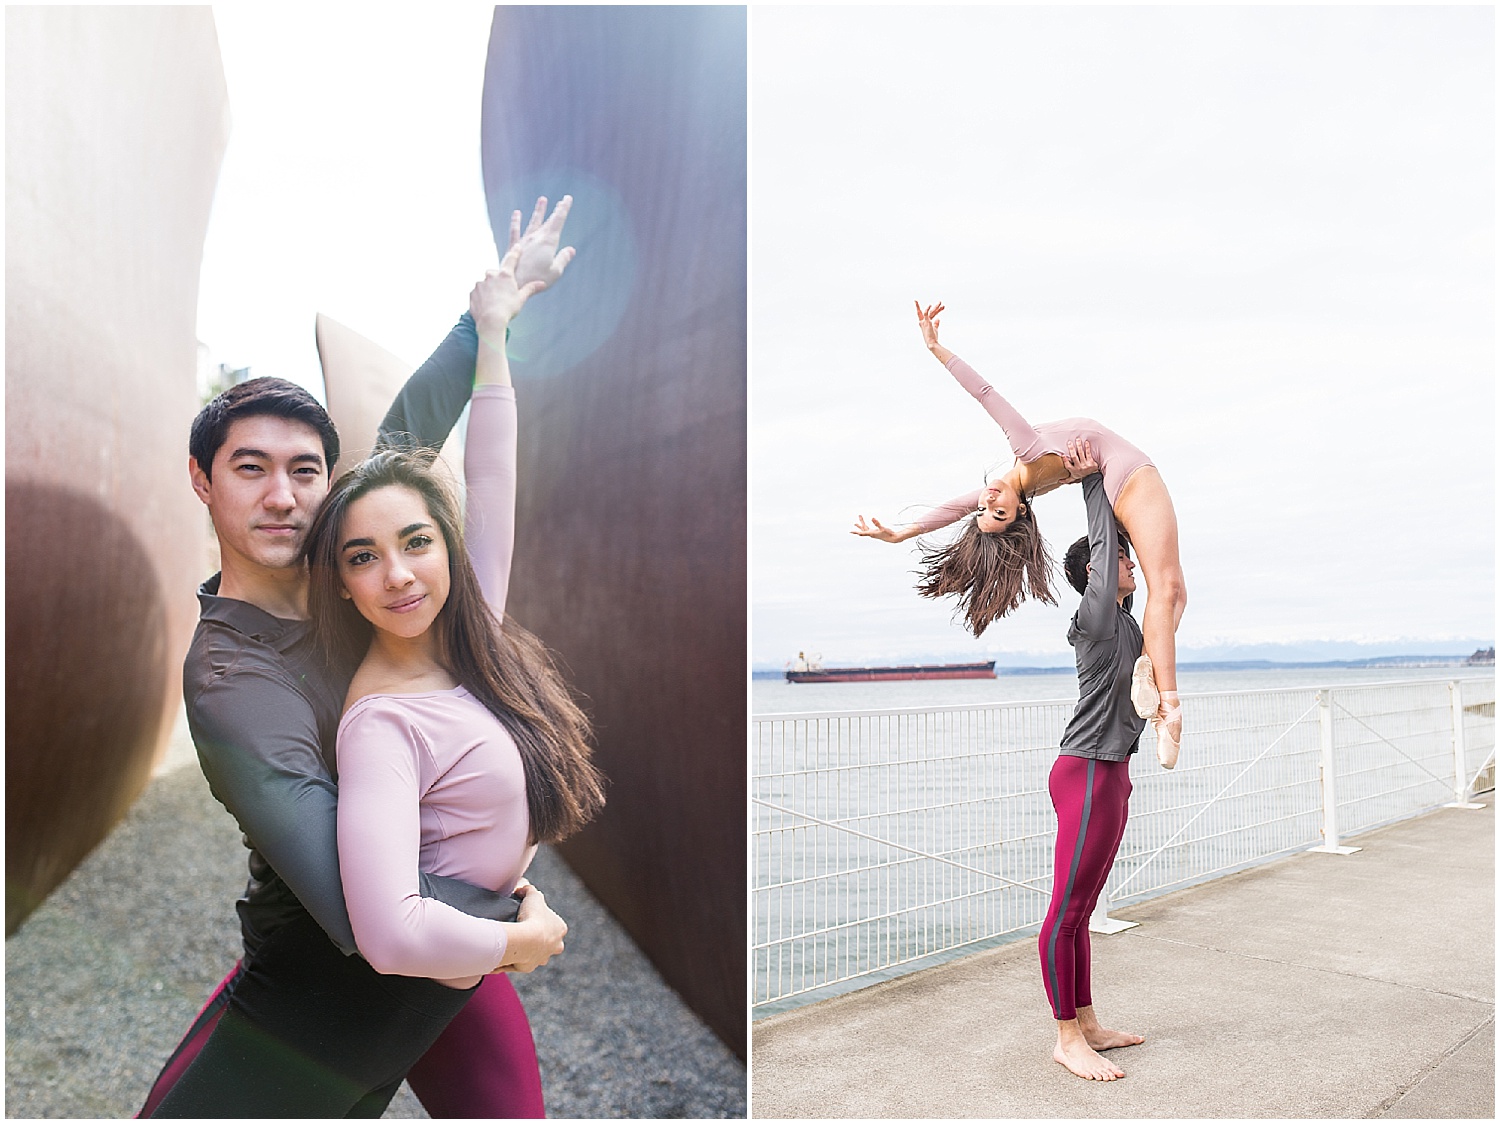 How to personalize your engagement pictures: do your favorite activity together.